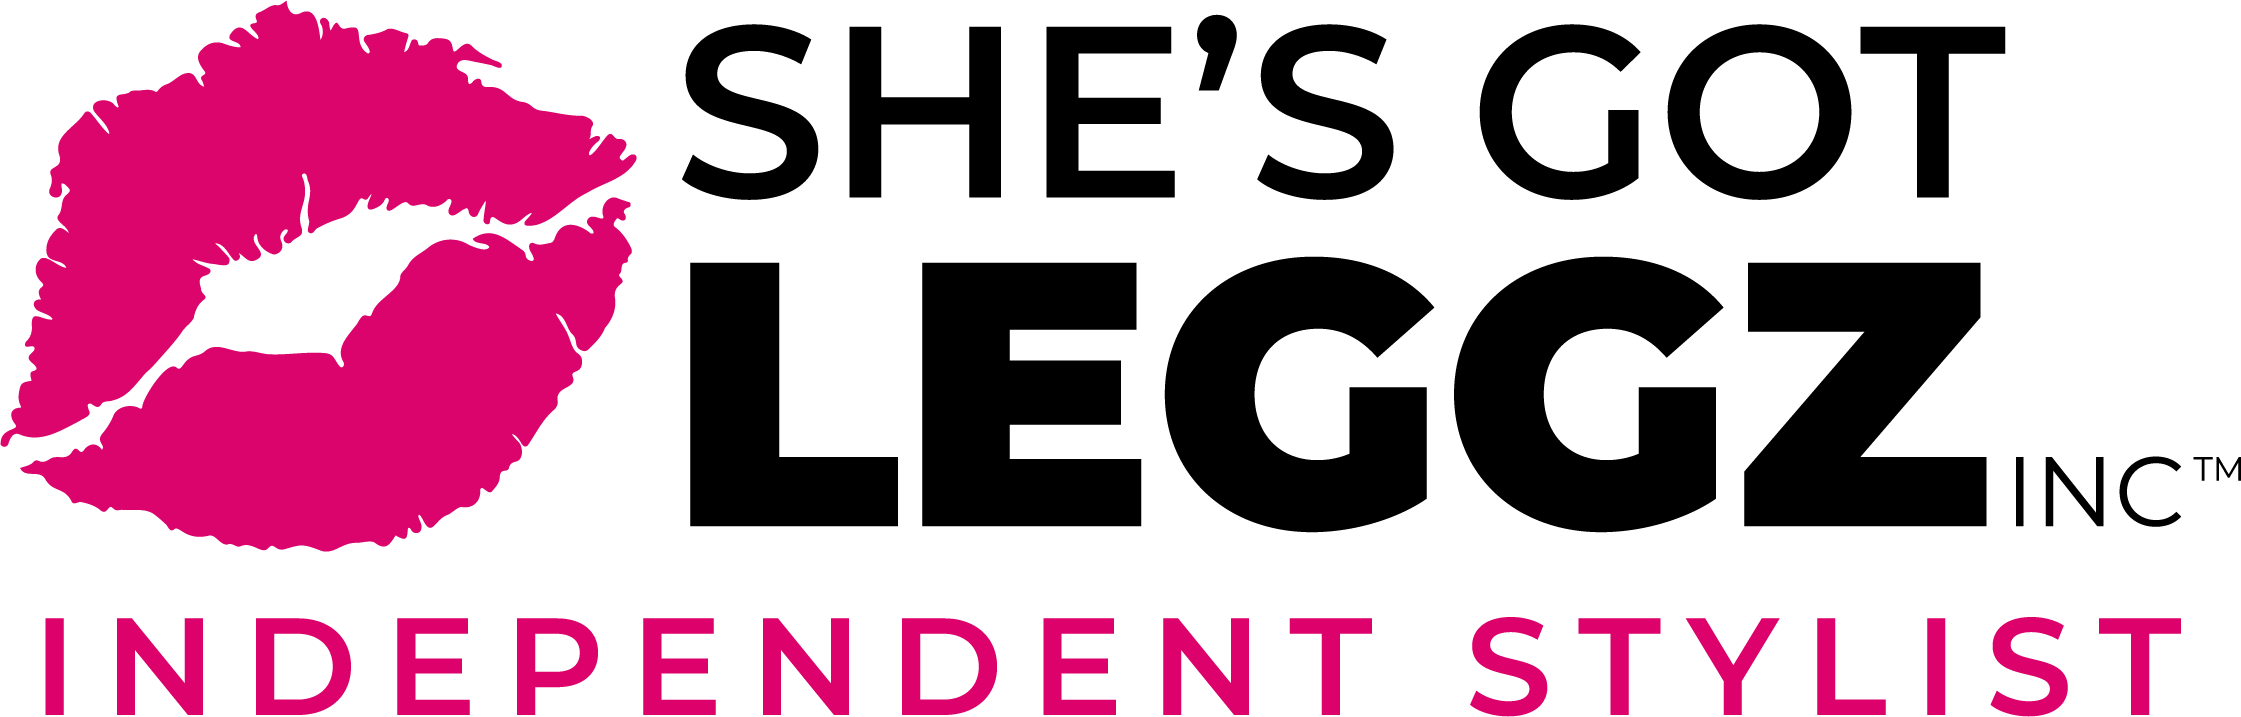 SGL Logo 2.0 - Independent Stylist - Stacked Black and Pink - Courtney Waterfall.png